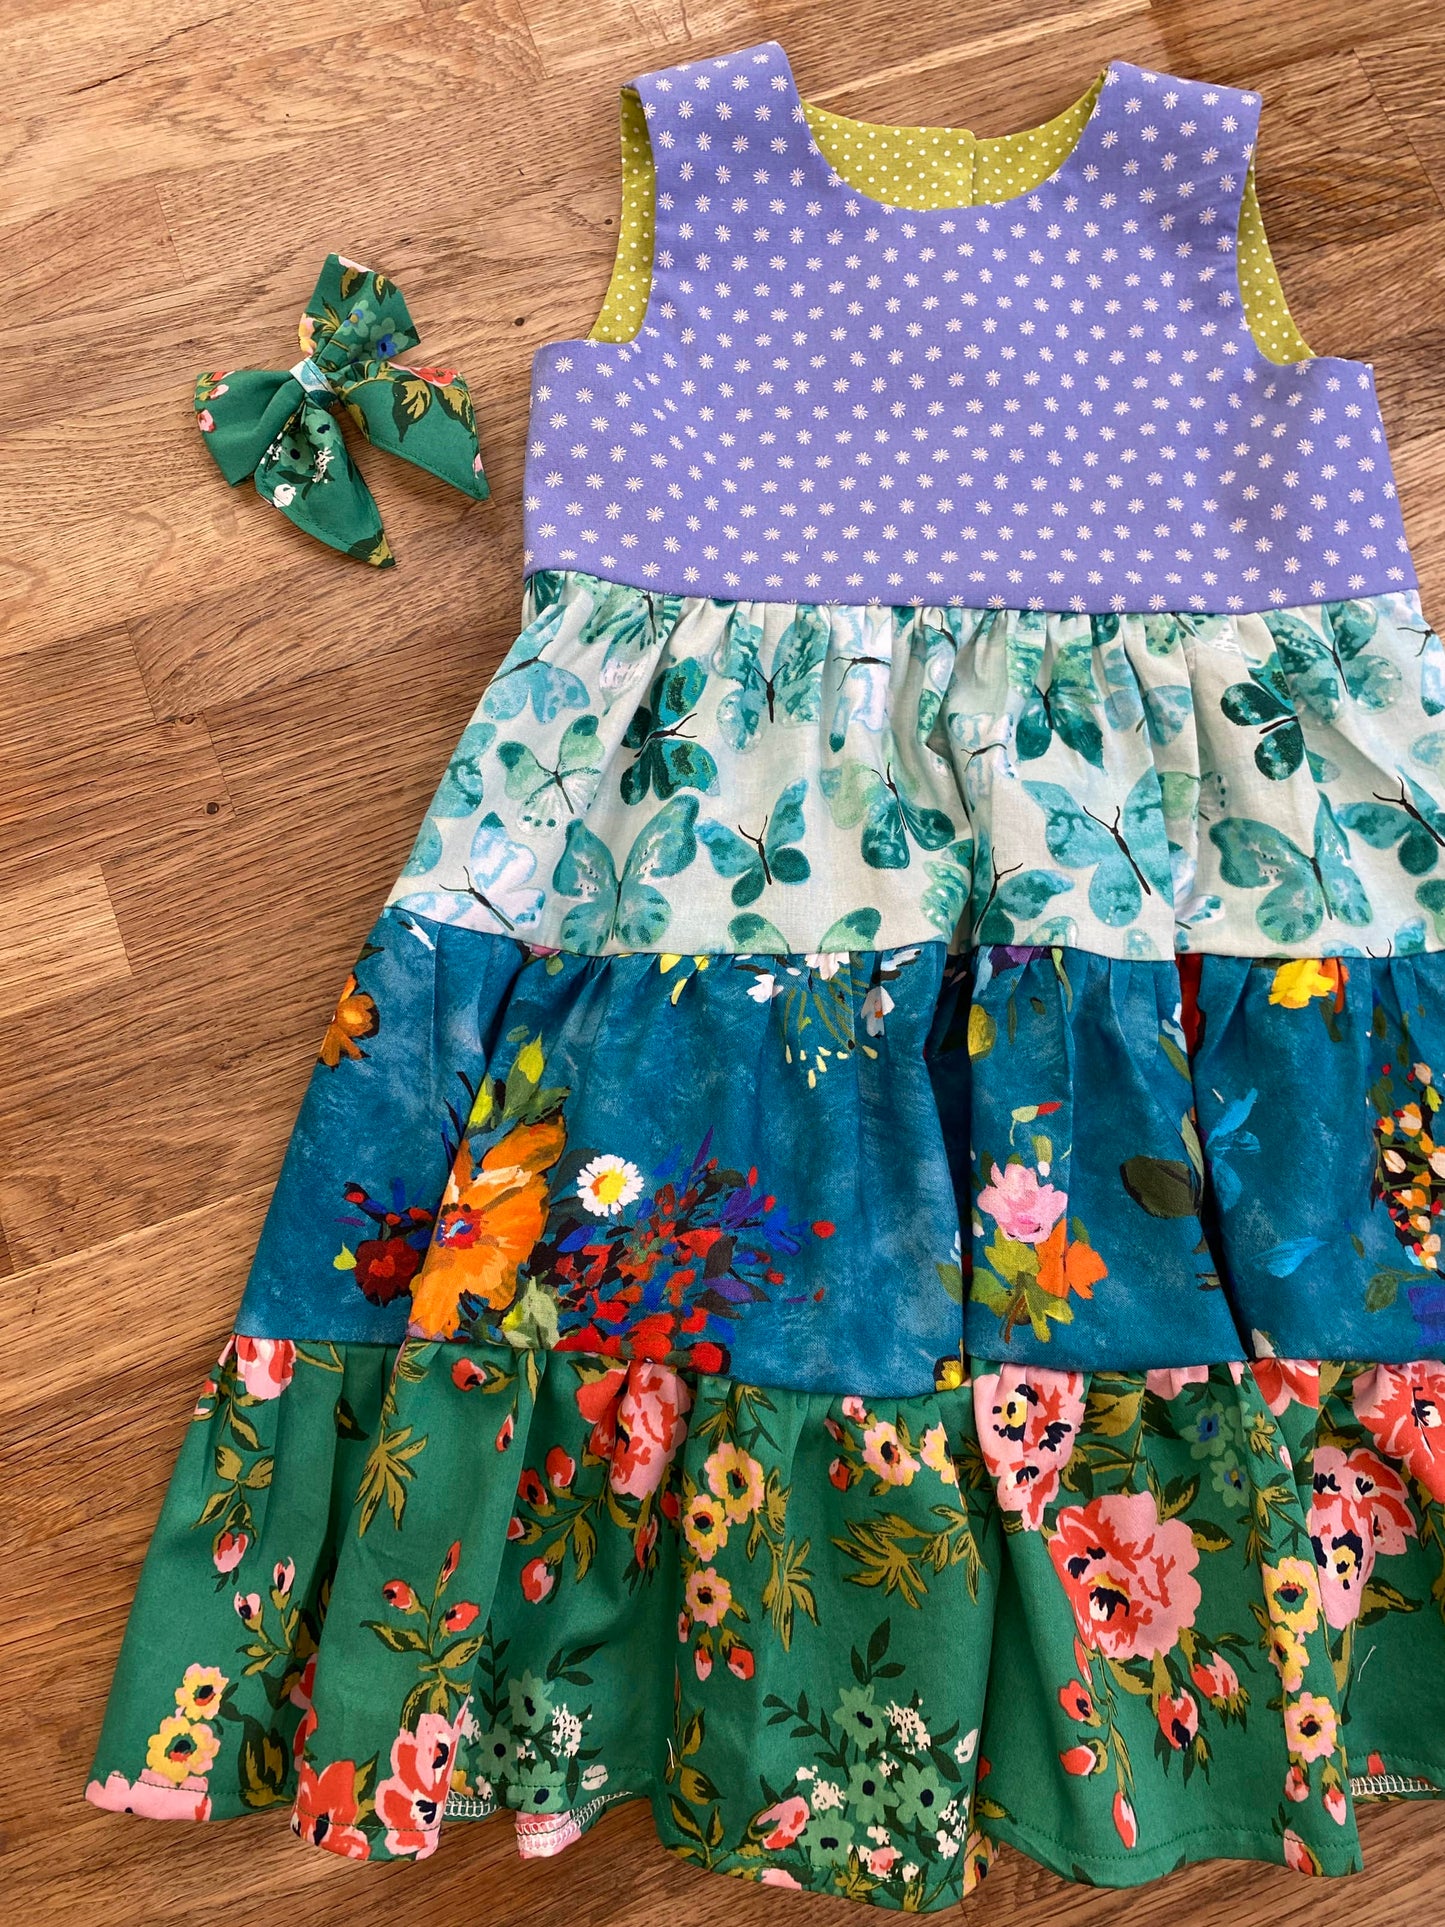 Blue & Green Floral Dress (SAMPLE) Size 4 - Ready to Ship